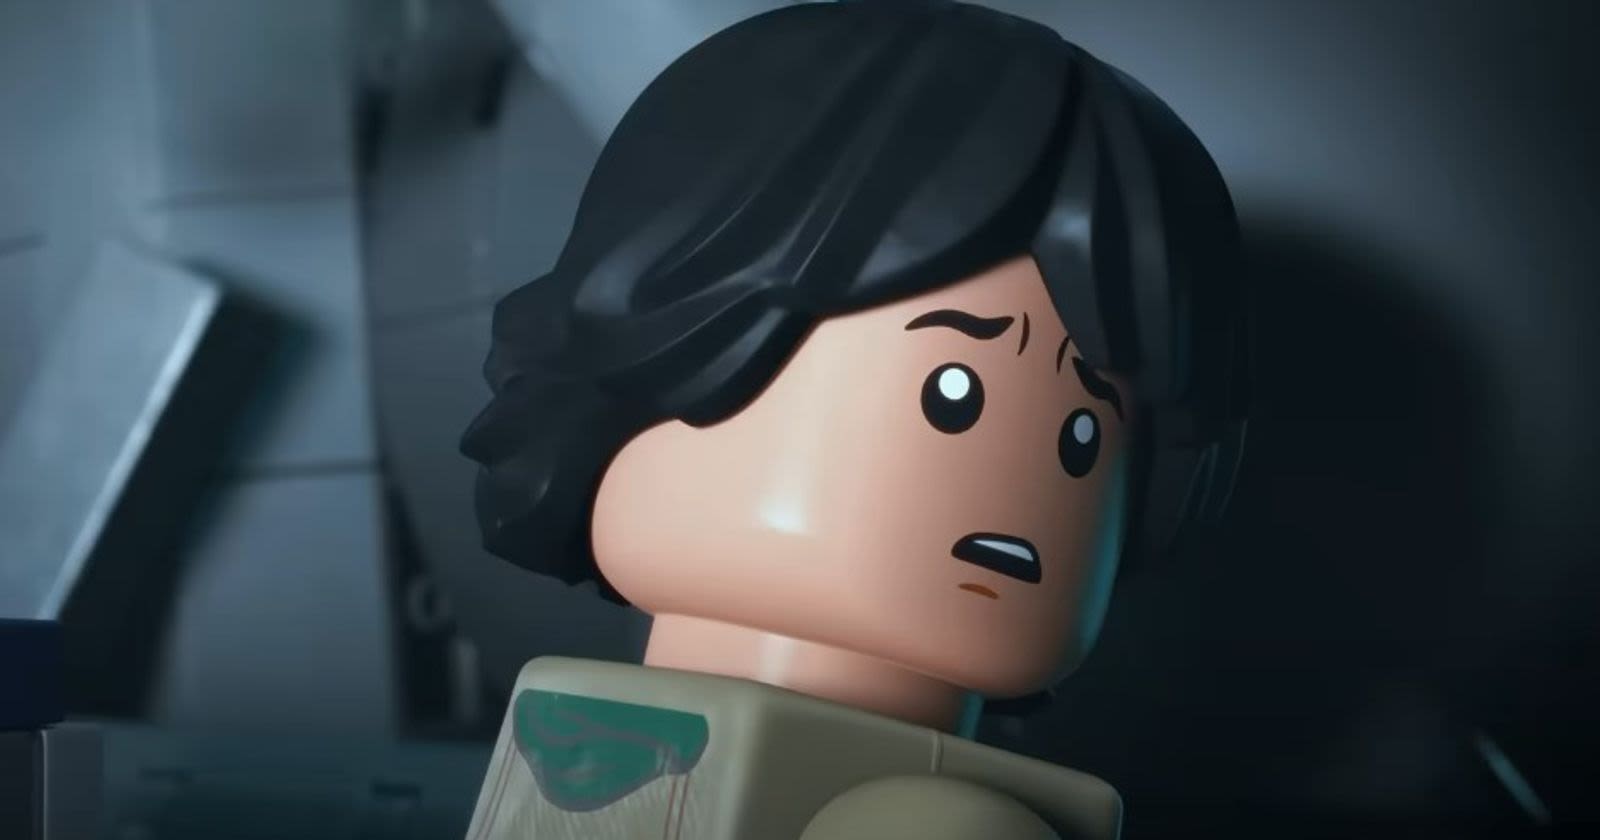 LEGO Rebuild the Galaxy Release Date: When Does the Star Wars Miniseries Come Out?